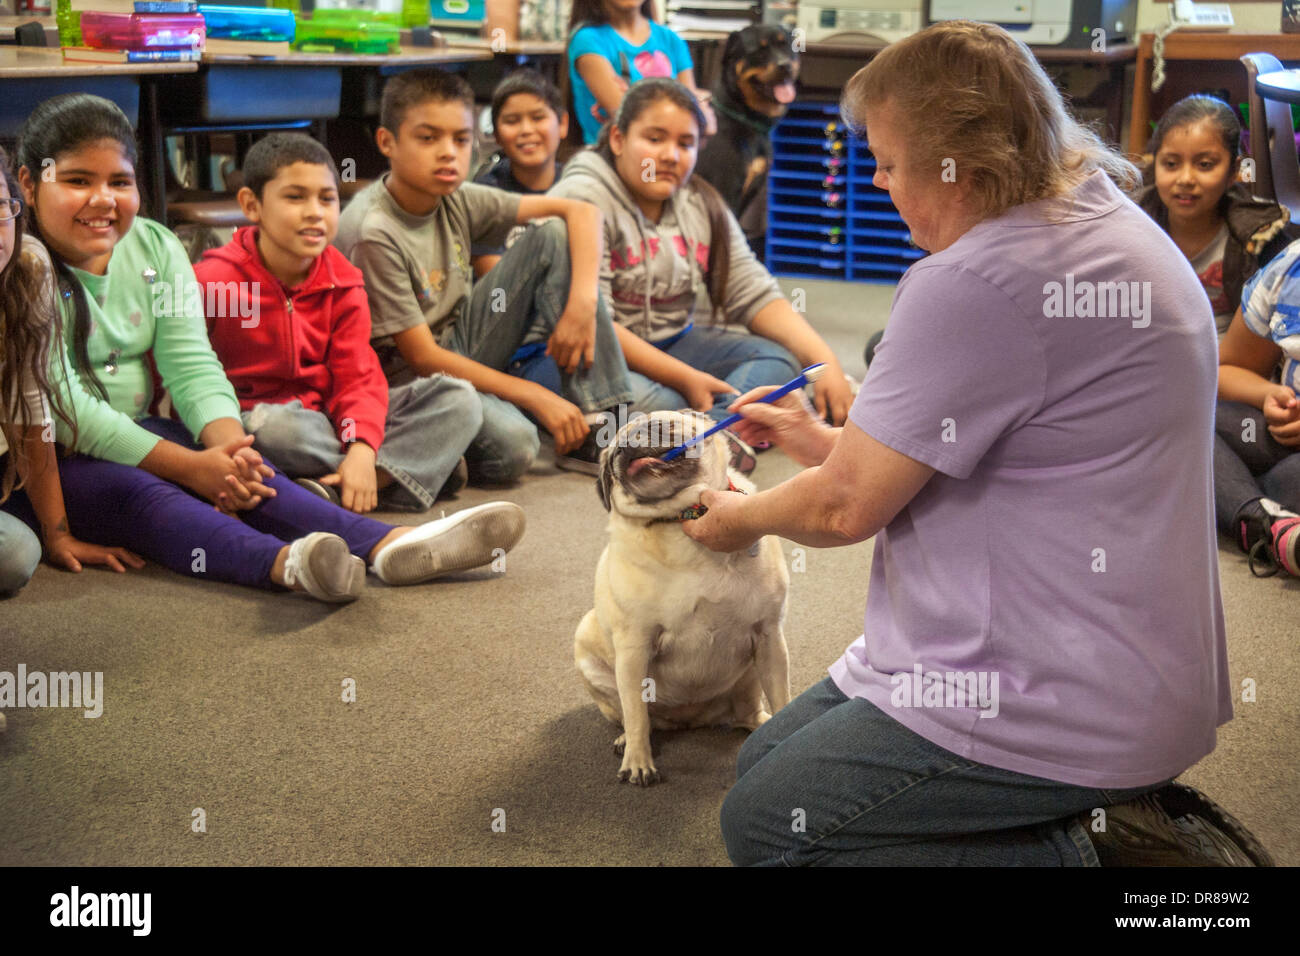 A predominantly Hispanic elementary school class in San Bernardino, CA, gets a lesson in pet care from an owner as she brushes her chow dog's teeth. Stock Photo